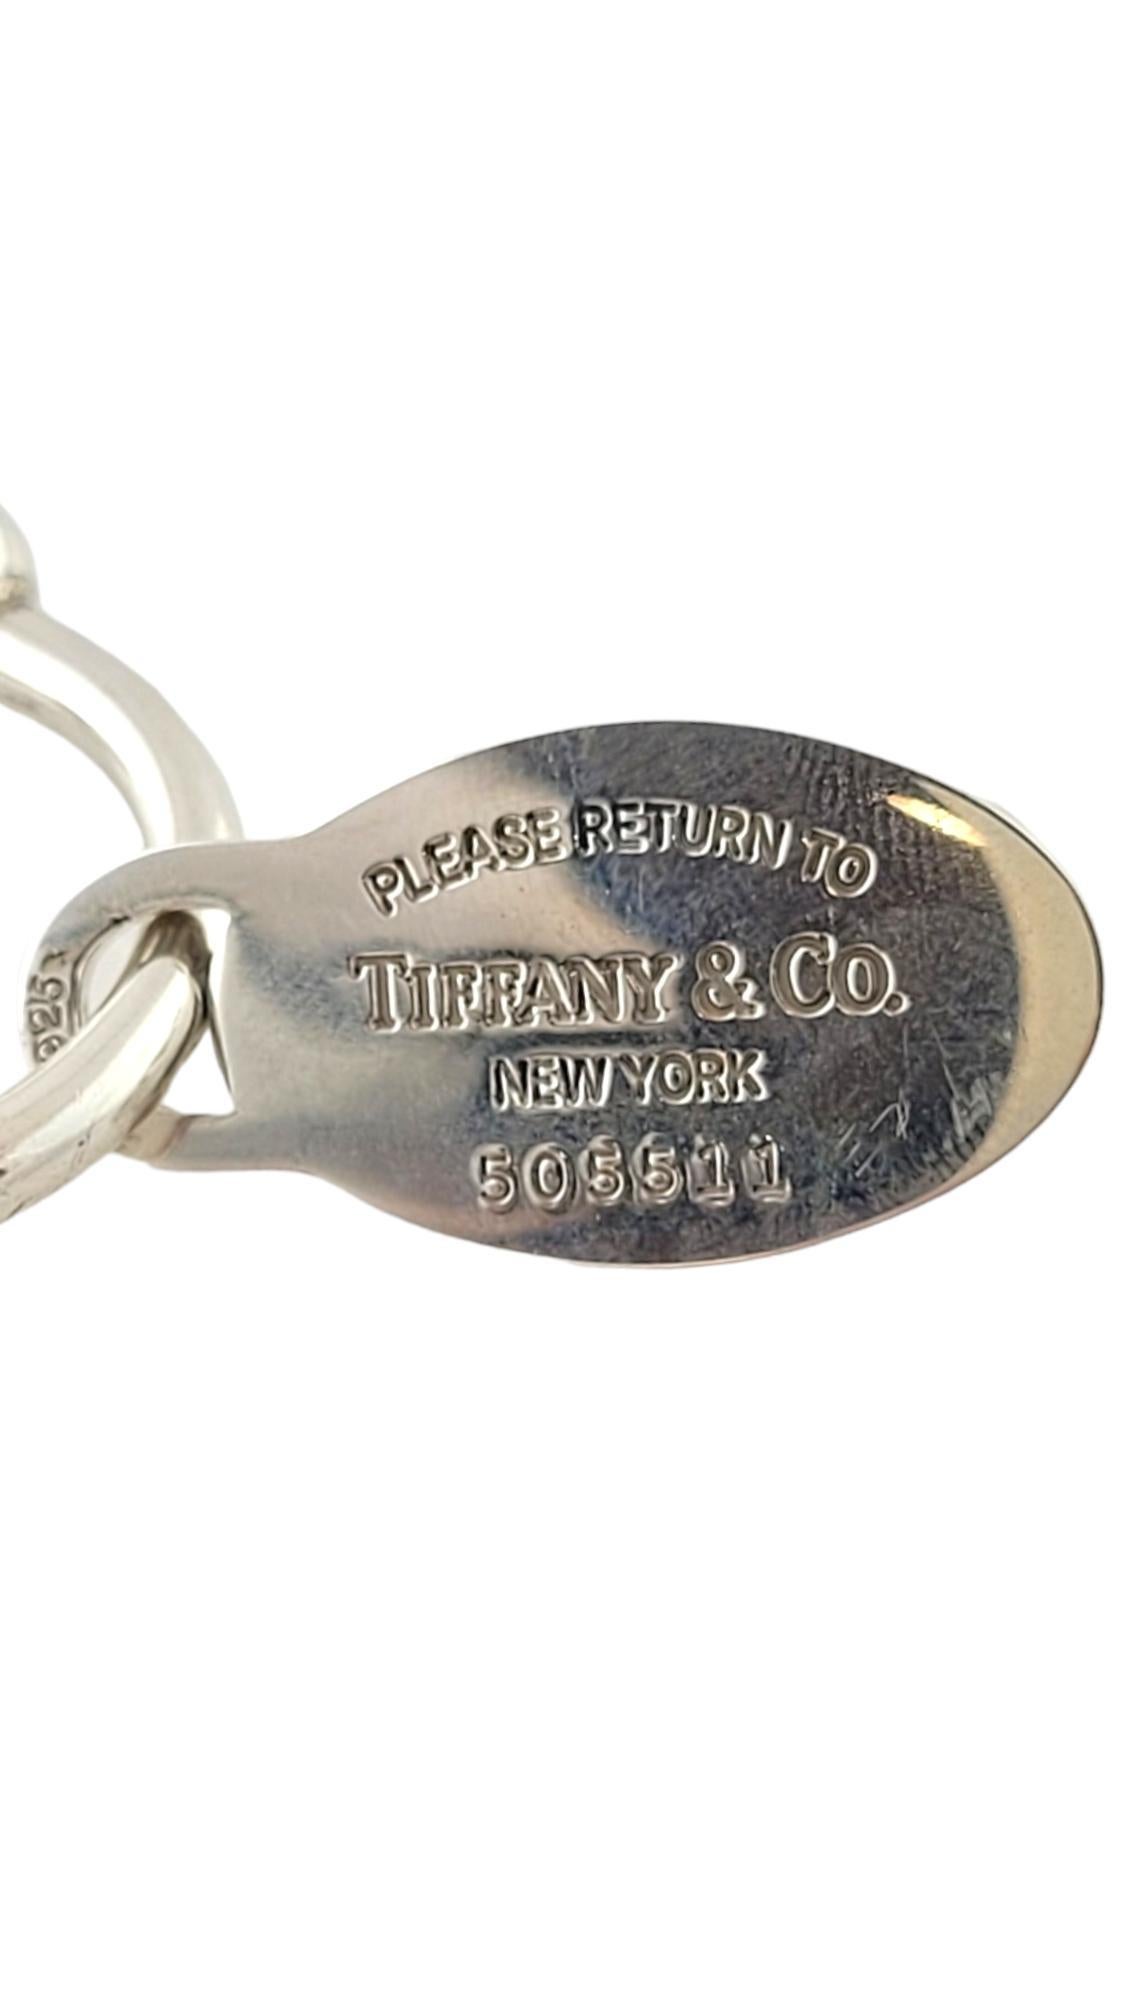 Tiffany & Co Sterling Silver Return to Tiffany Oval Tag Screwball Key Ring

This gorgeous sterling silver piece by Tiffany & Co. features a screwball key ring with a beautiful 